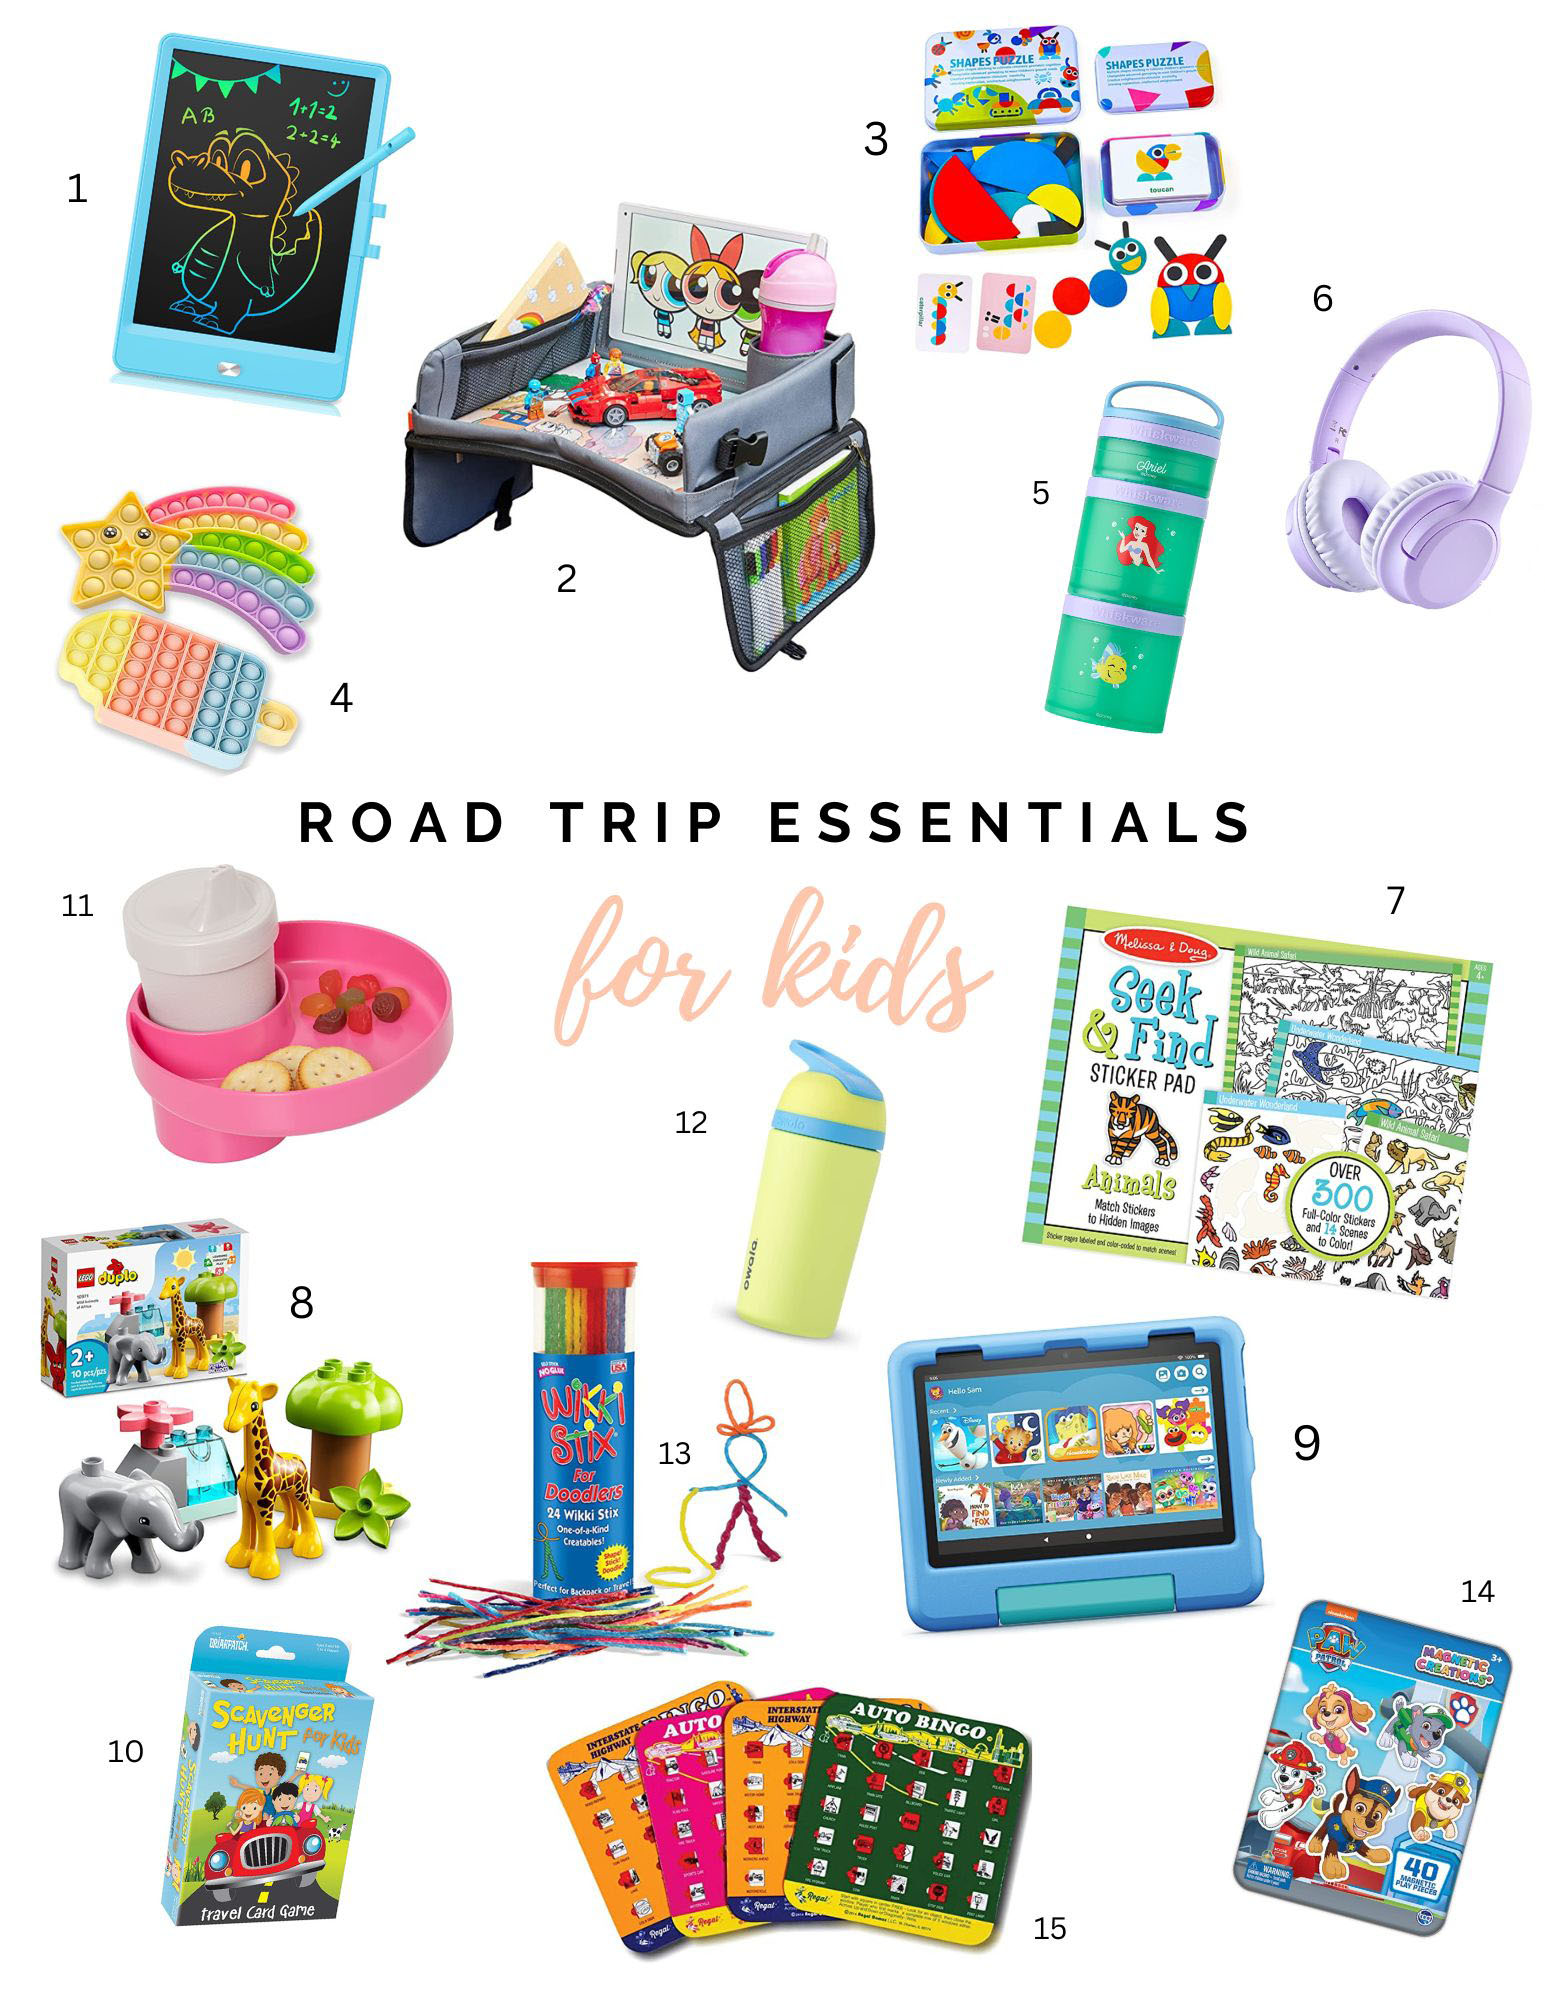 Road Trip Essentials for Kids Amazon Guide